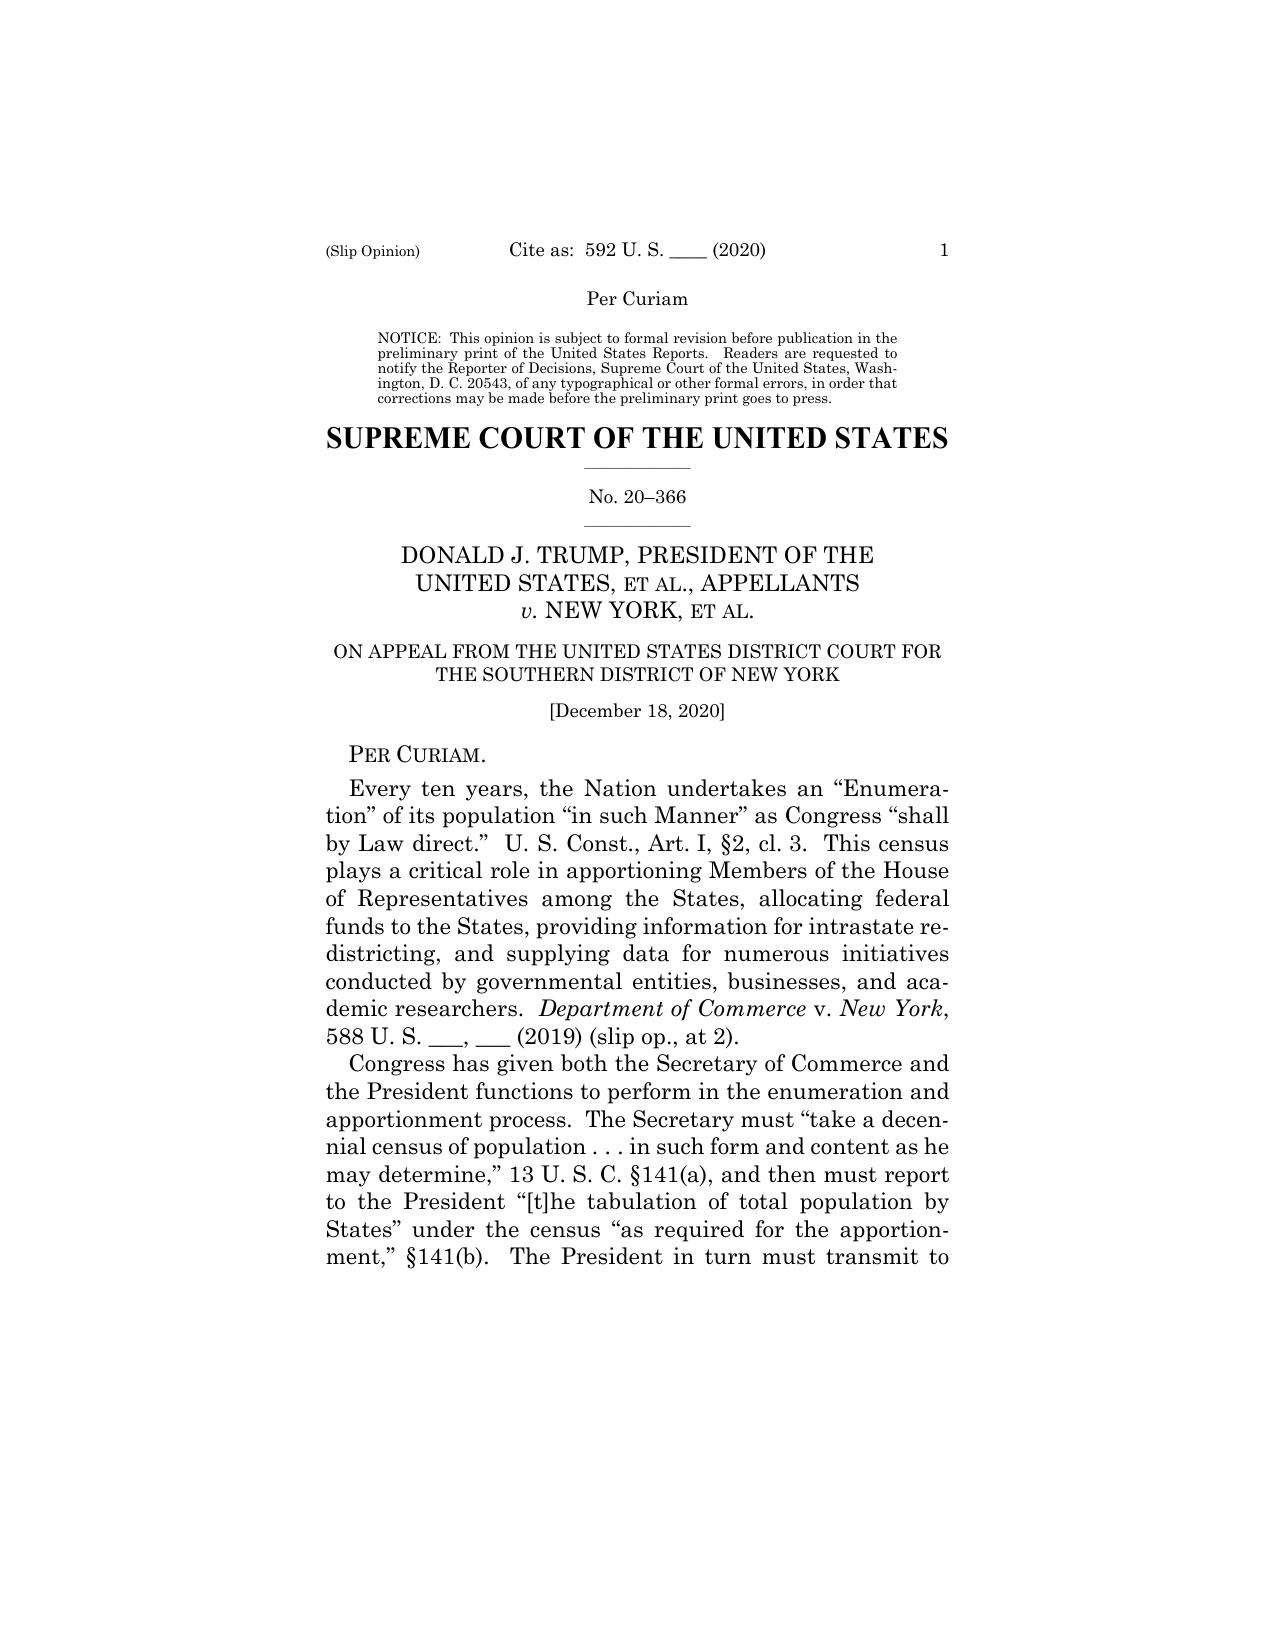 first page of a Supreme Court slip opinion